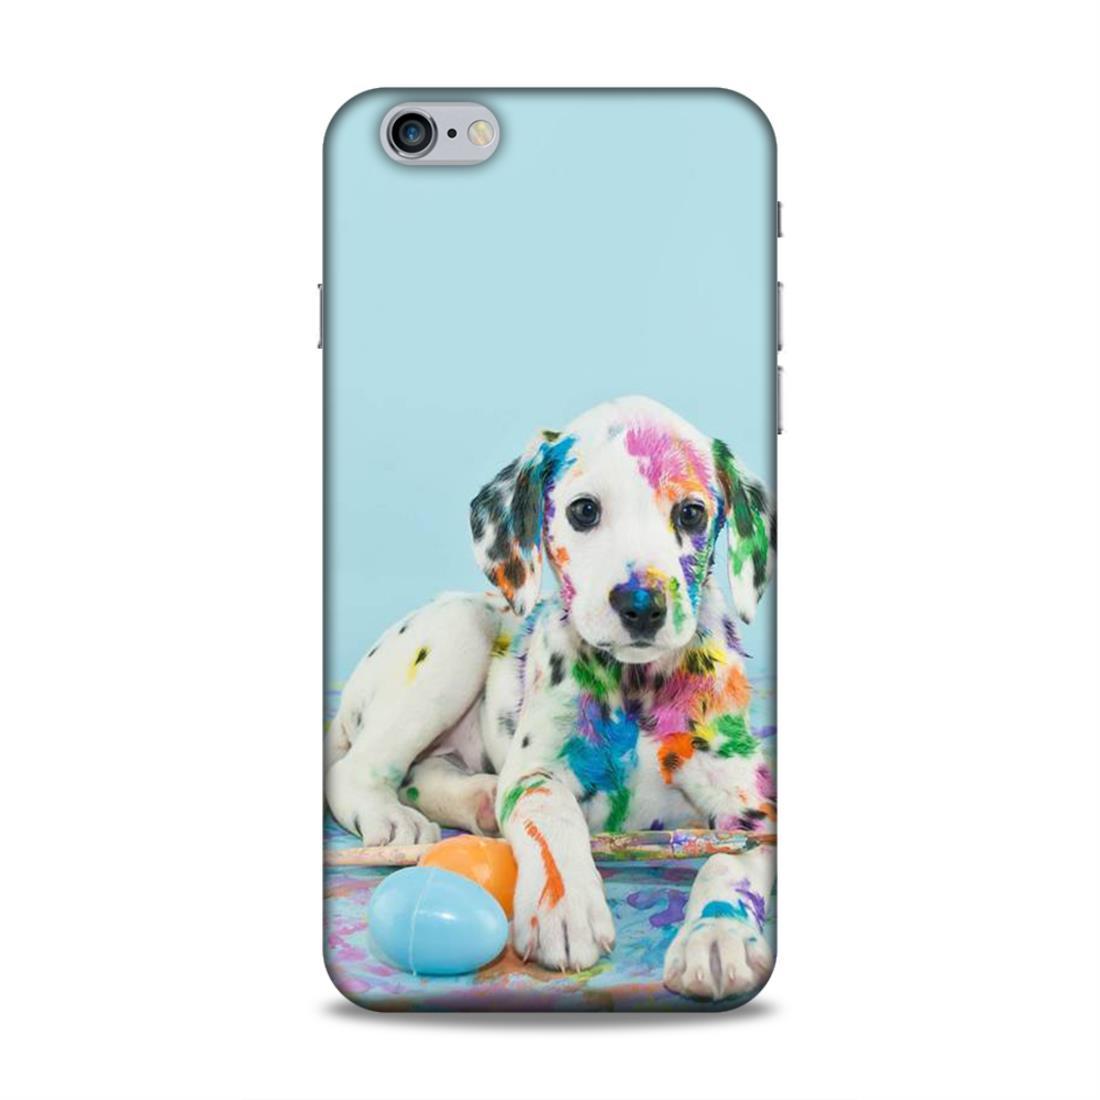 Cute Dog Lover iPhone 6 Plus Mobile Case Cover